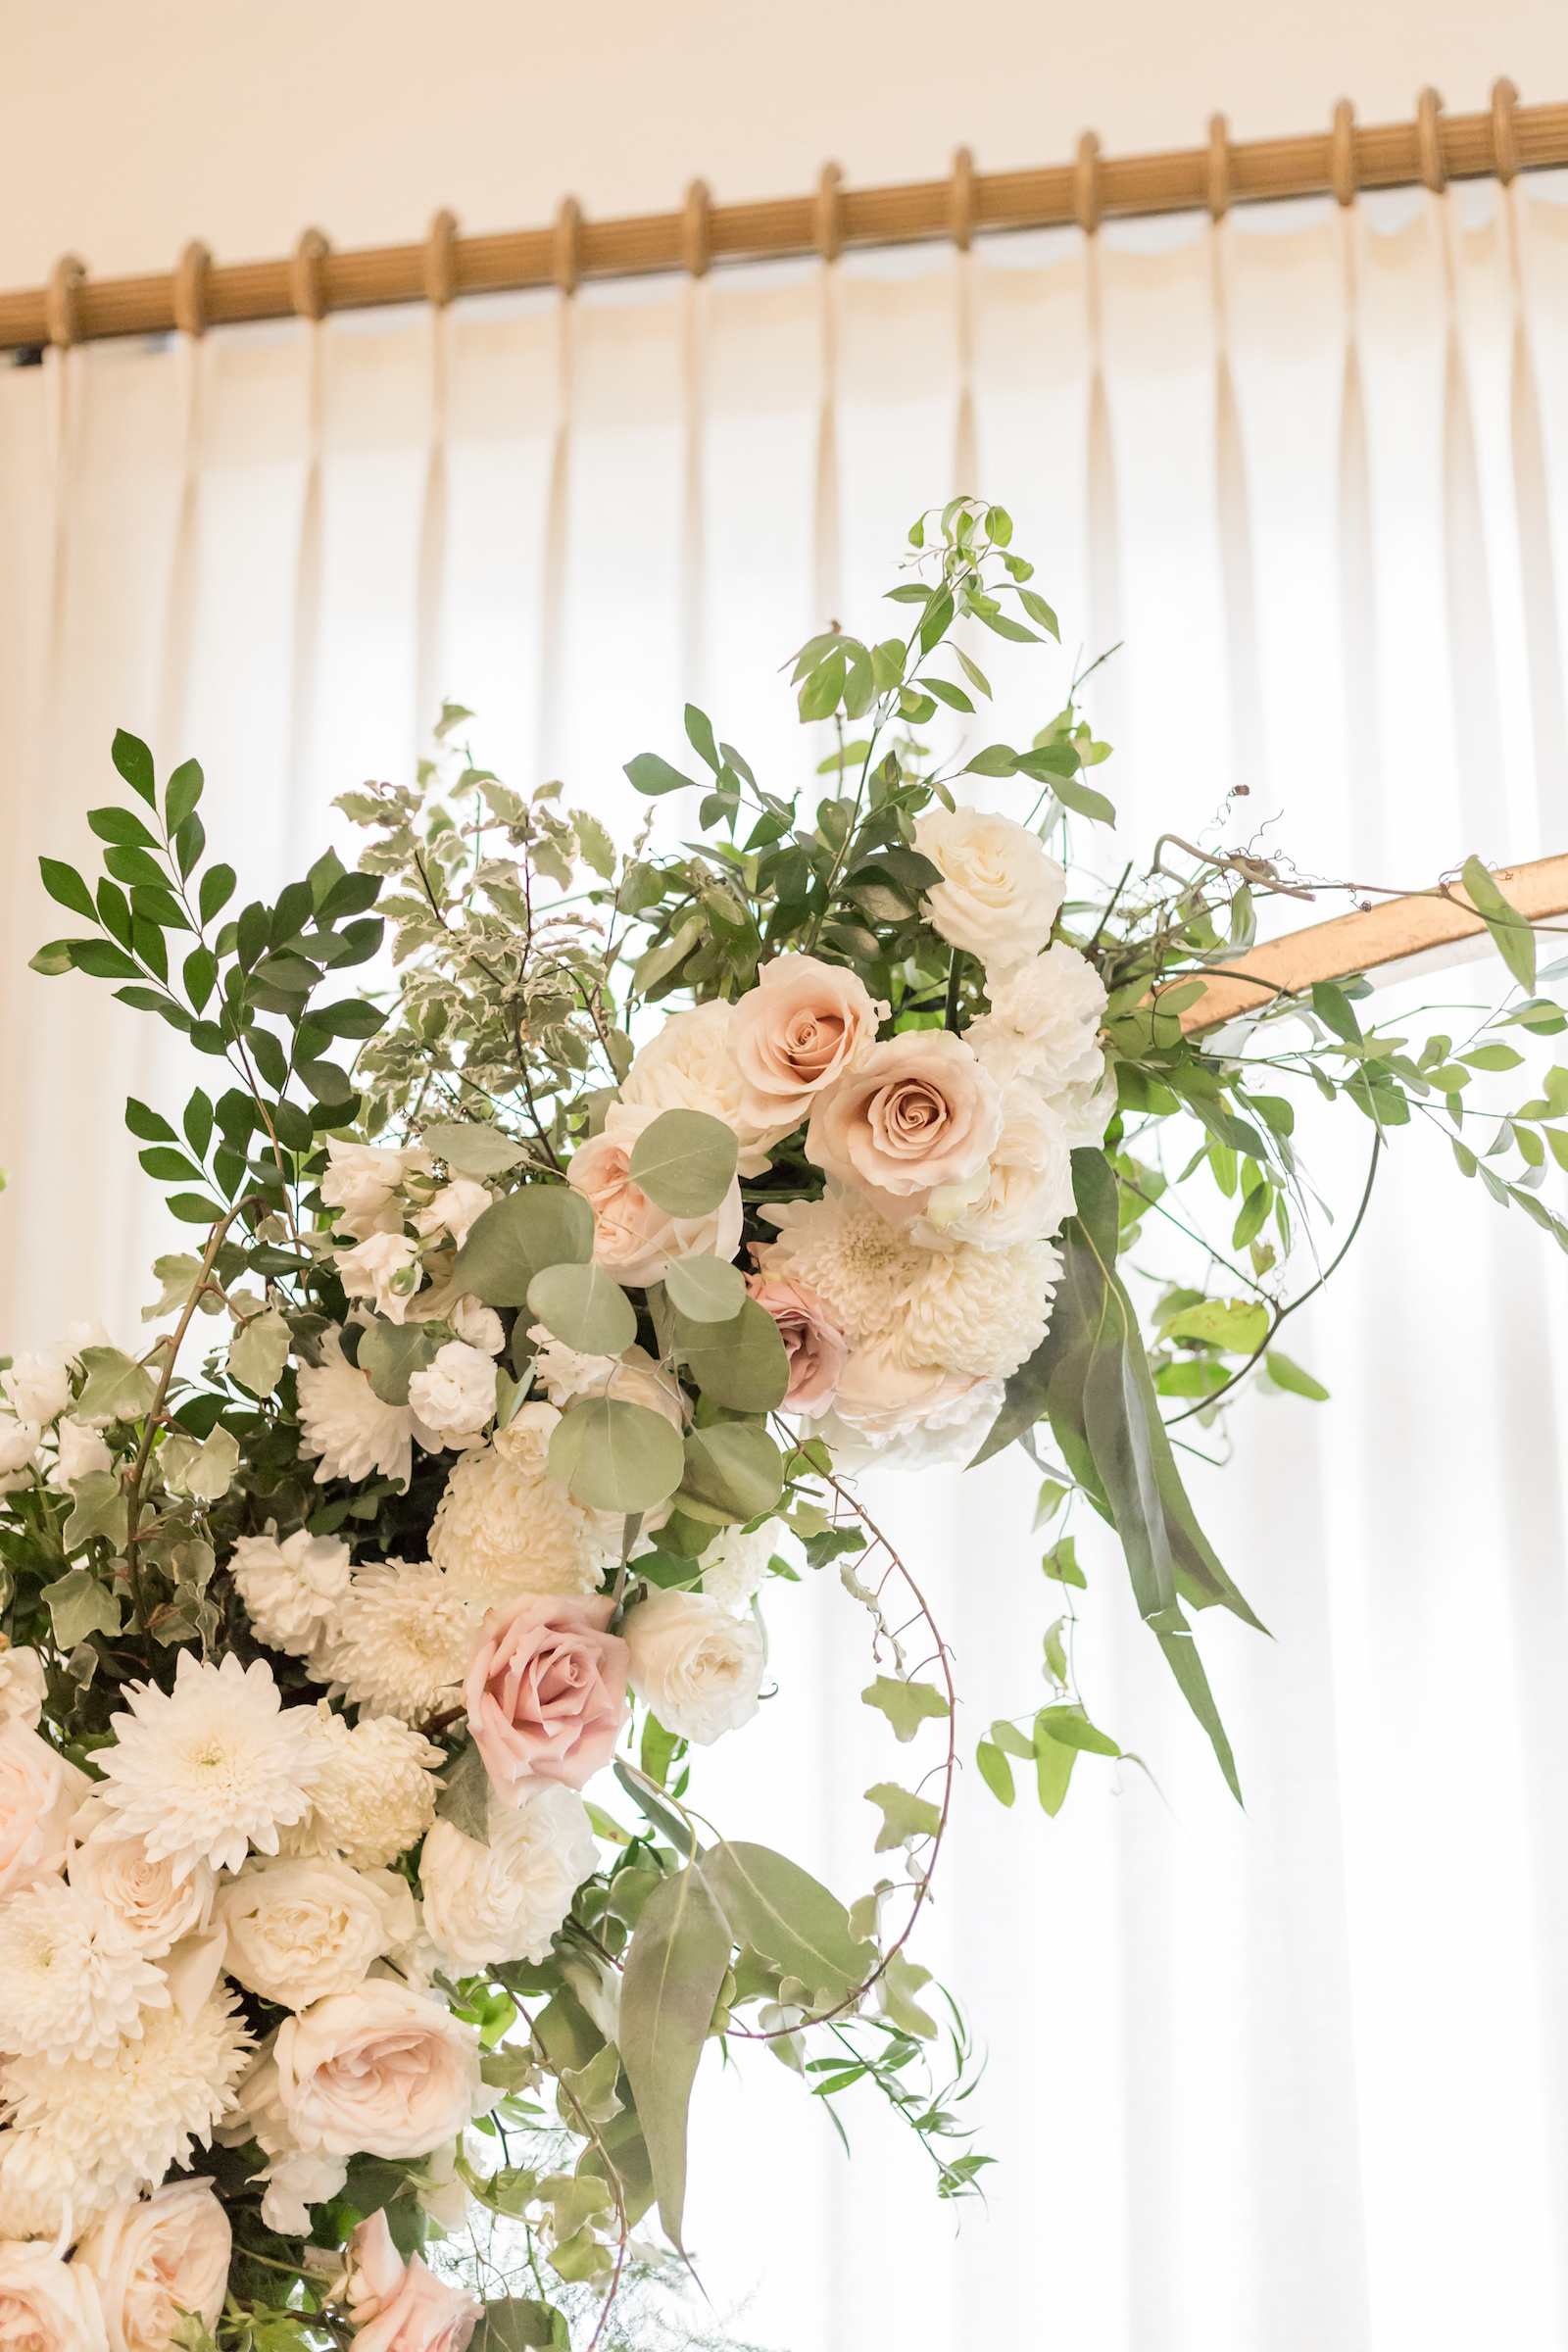 Classic and timeless lush white, blush pink roses floral arrangement, eucalyptus and greenery | Tampa Bay wedding planner and designer Elegant Affairs by Design